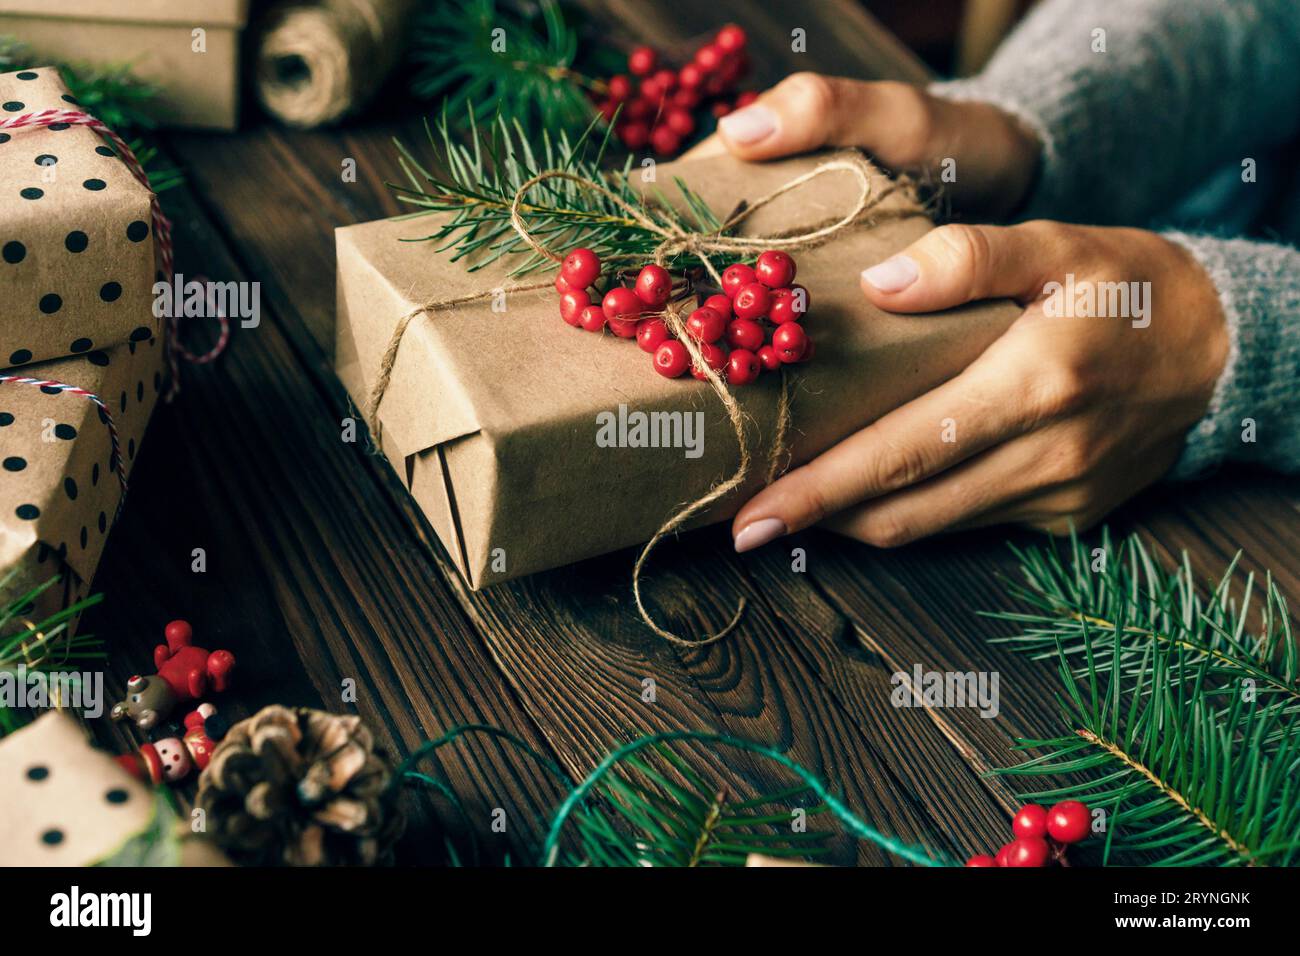 Close-up of a Christmas present wrapped in craft paper and decorated with berries and a spruce branch in female hands. Stock Photo